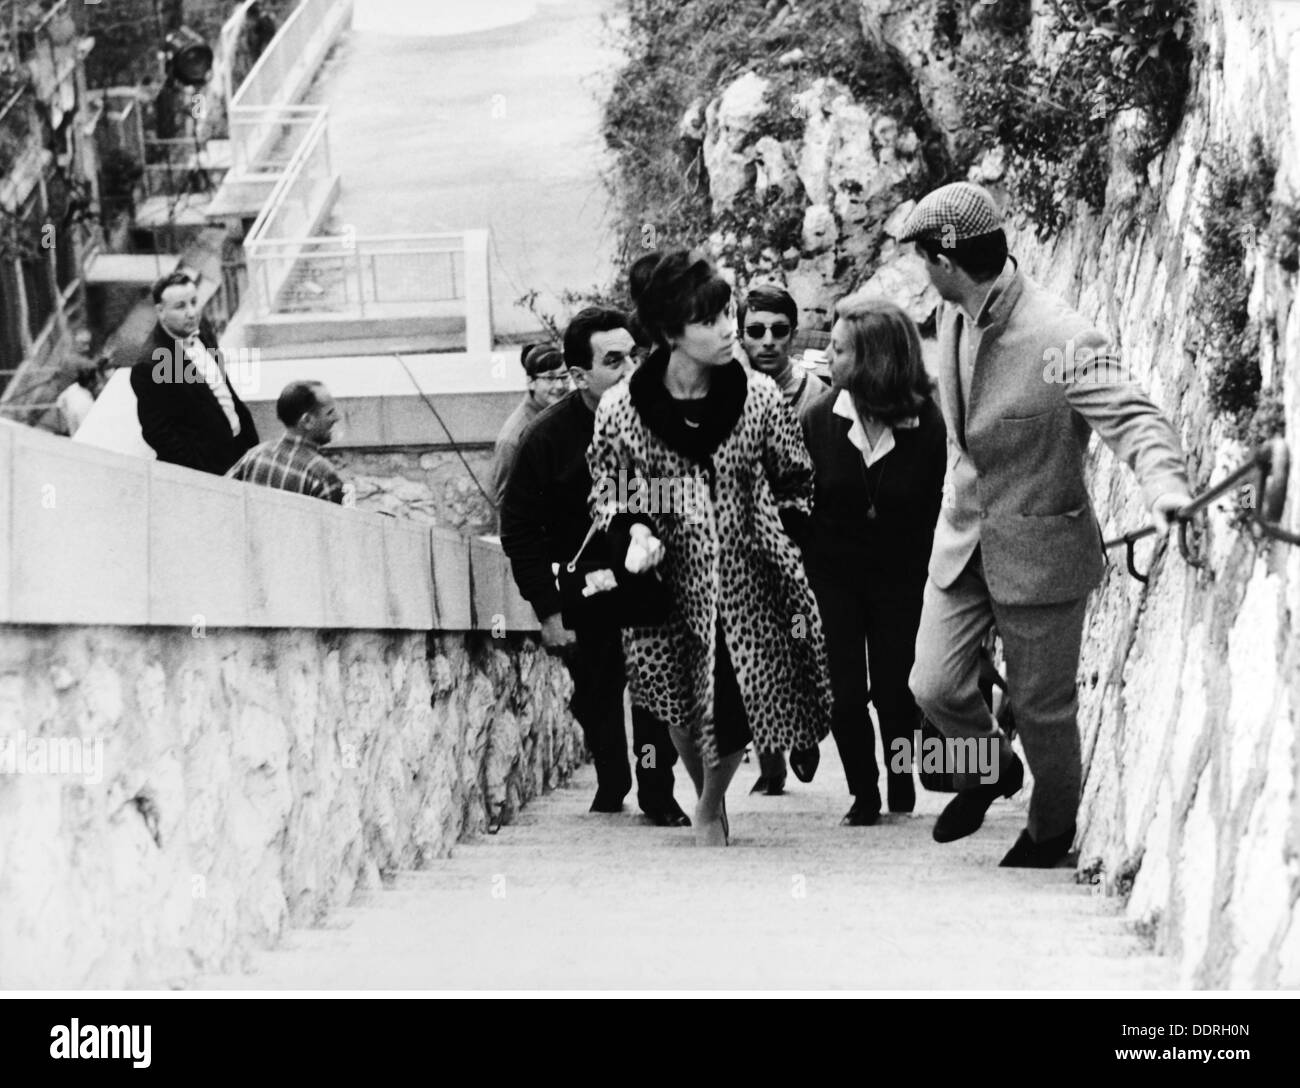 Belmondo, Jean-Paul, * 9.4.1933, French actor, half length, with first wife Renee 'Elodie' Constantin, Villefranche-sur-Mer, March 1963, Stock Photo